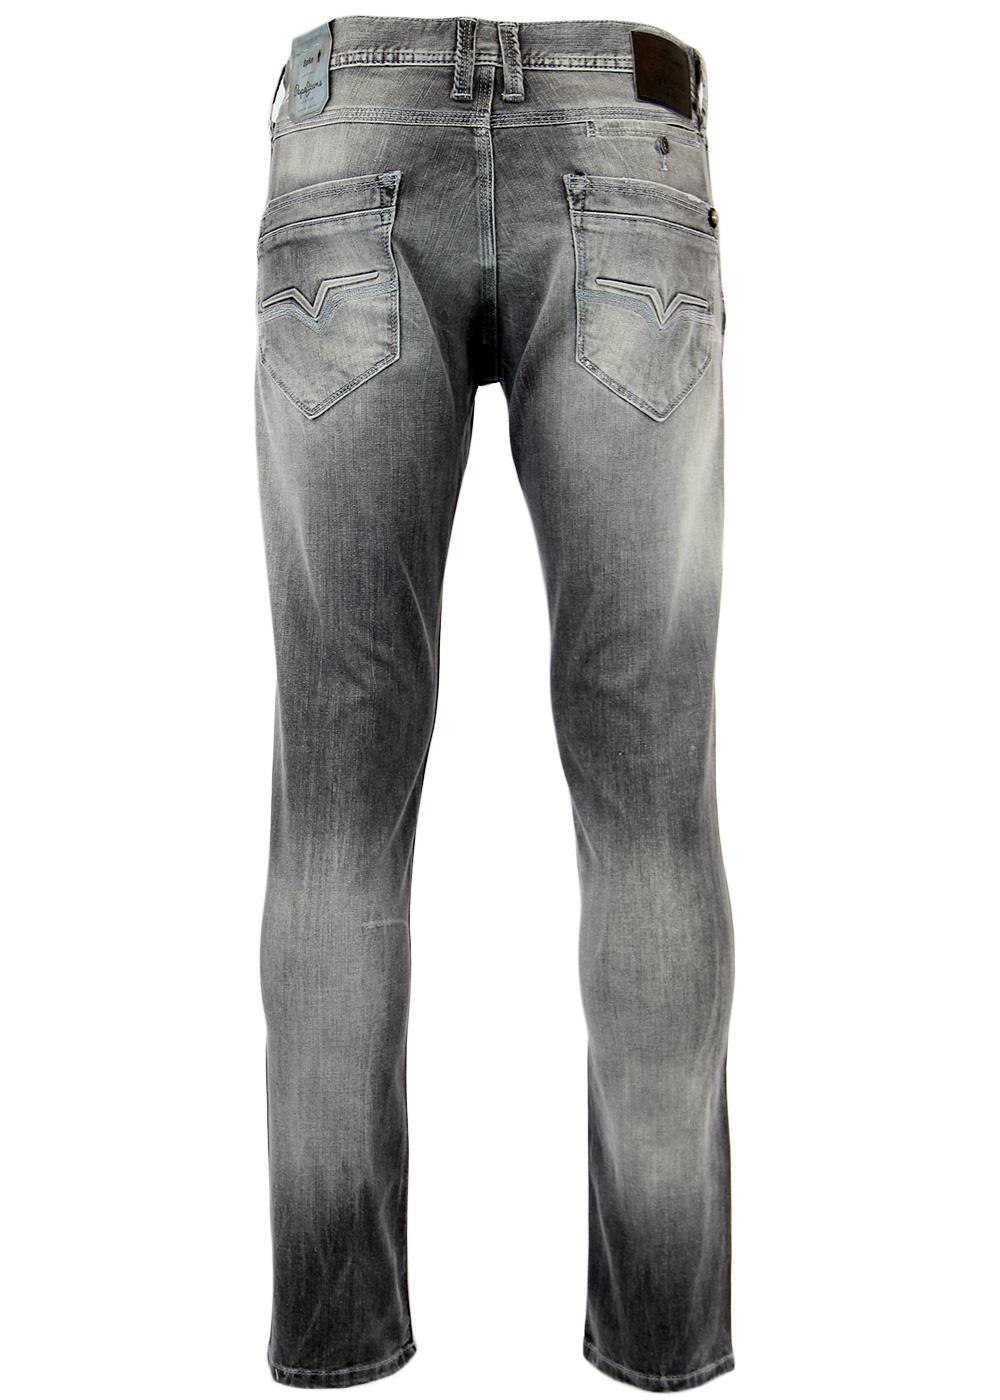 PEPE JEANS Spike Retro Mod Slim Tapered Fit Jeans in Grey